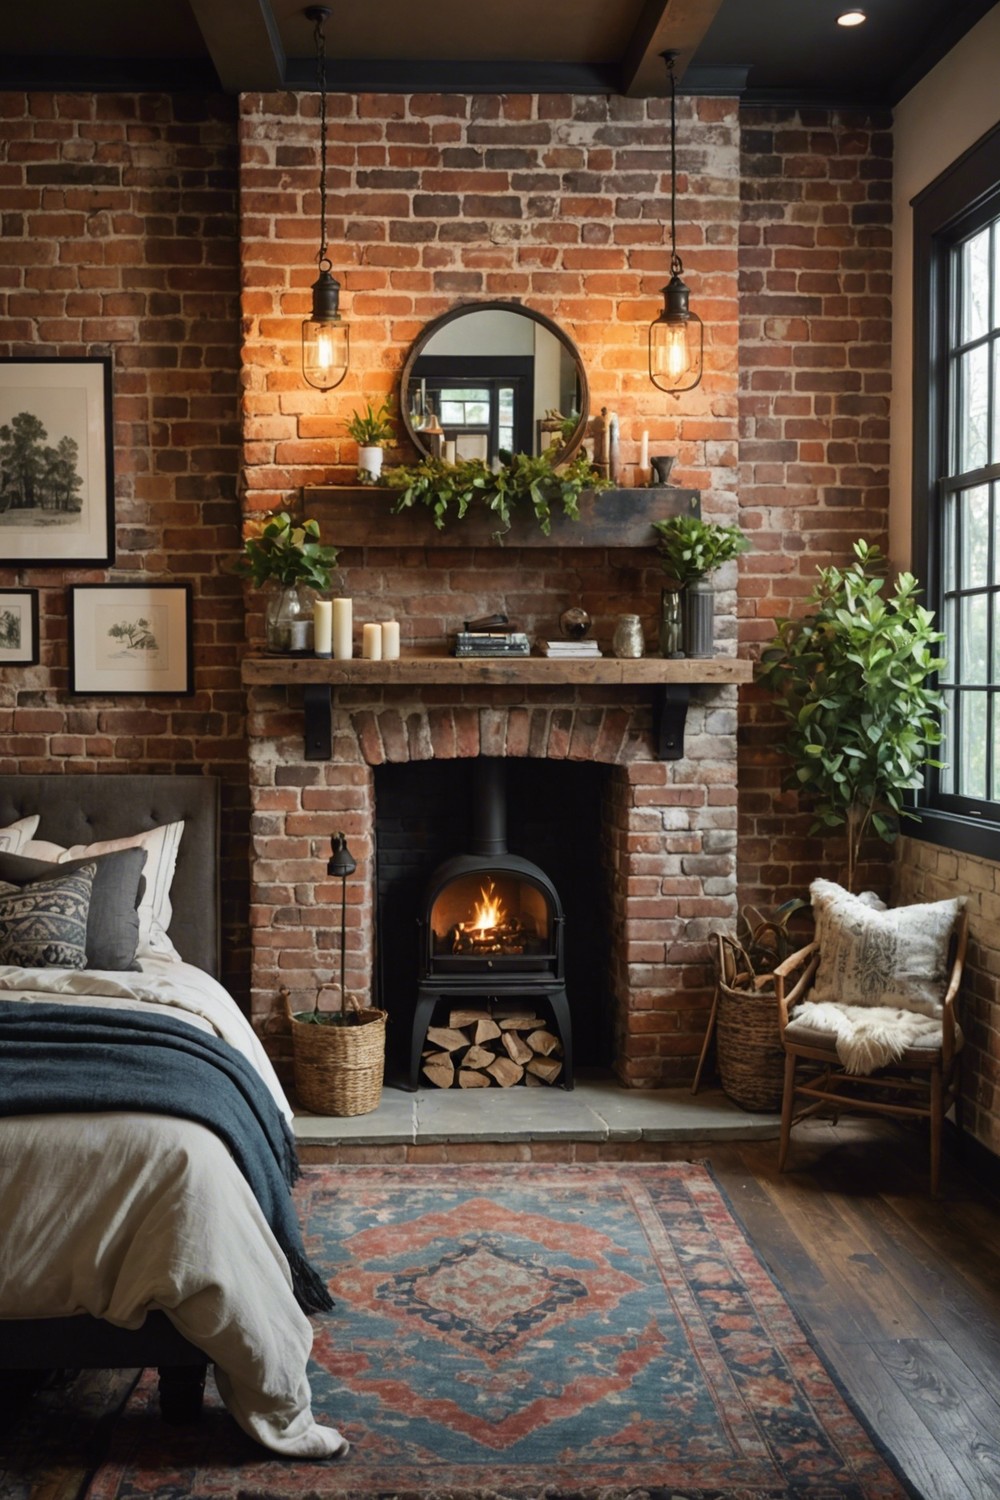 Industrial Chic with Exposed Brick: